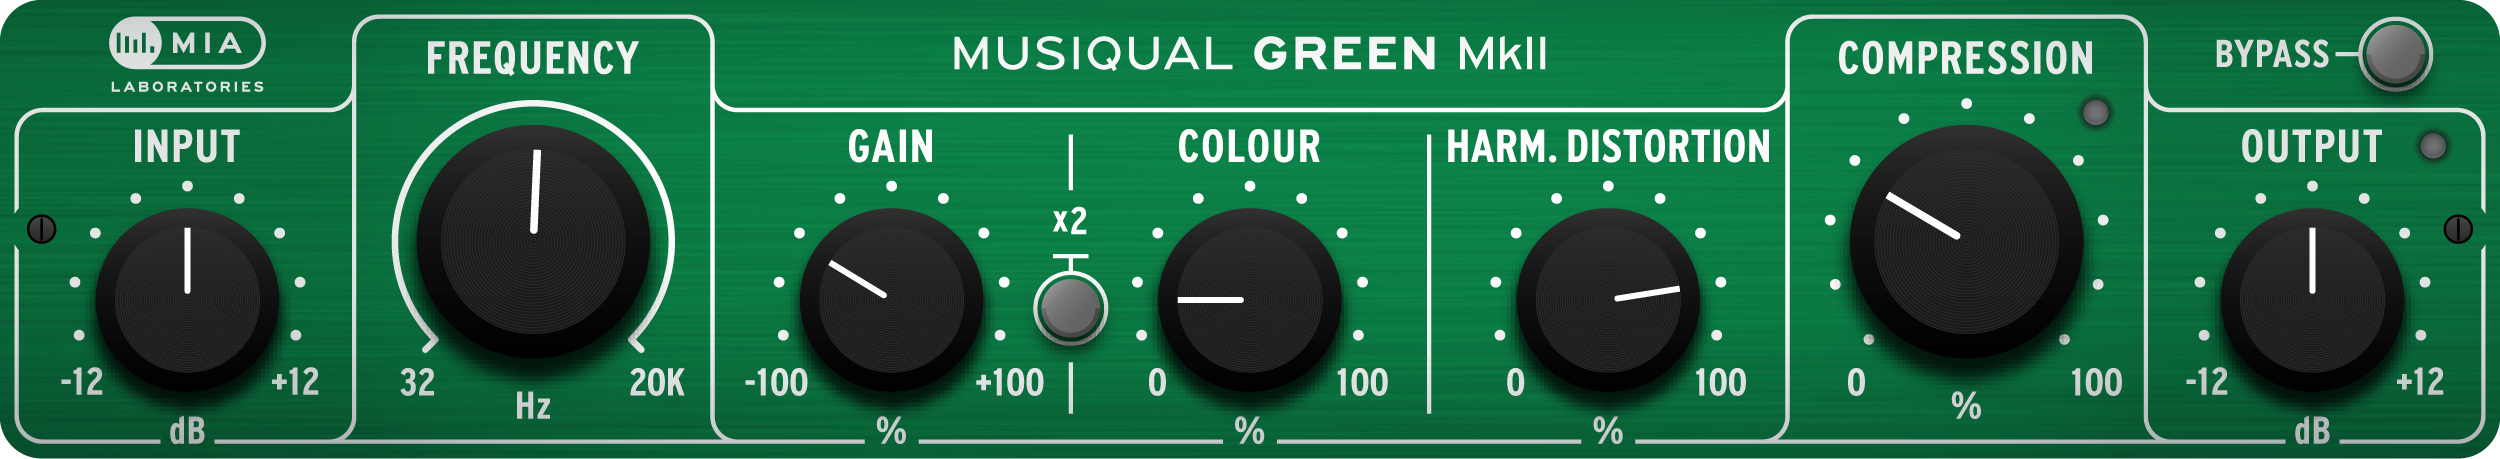 Musiqual Green MkII